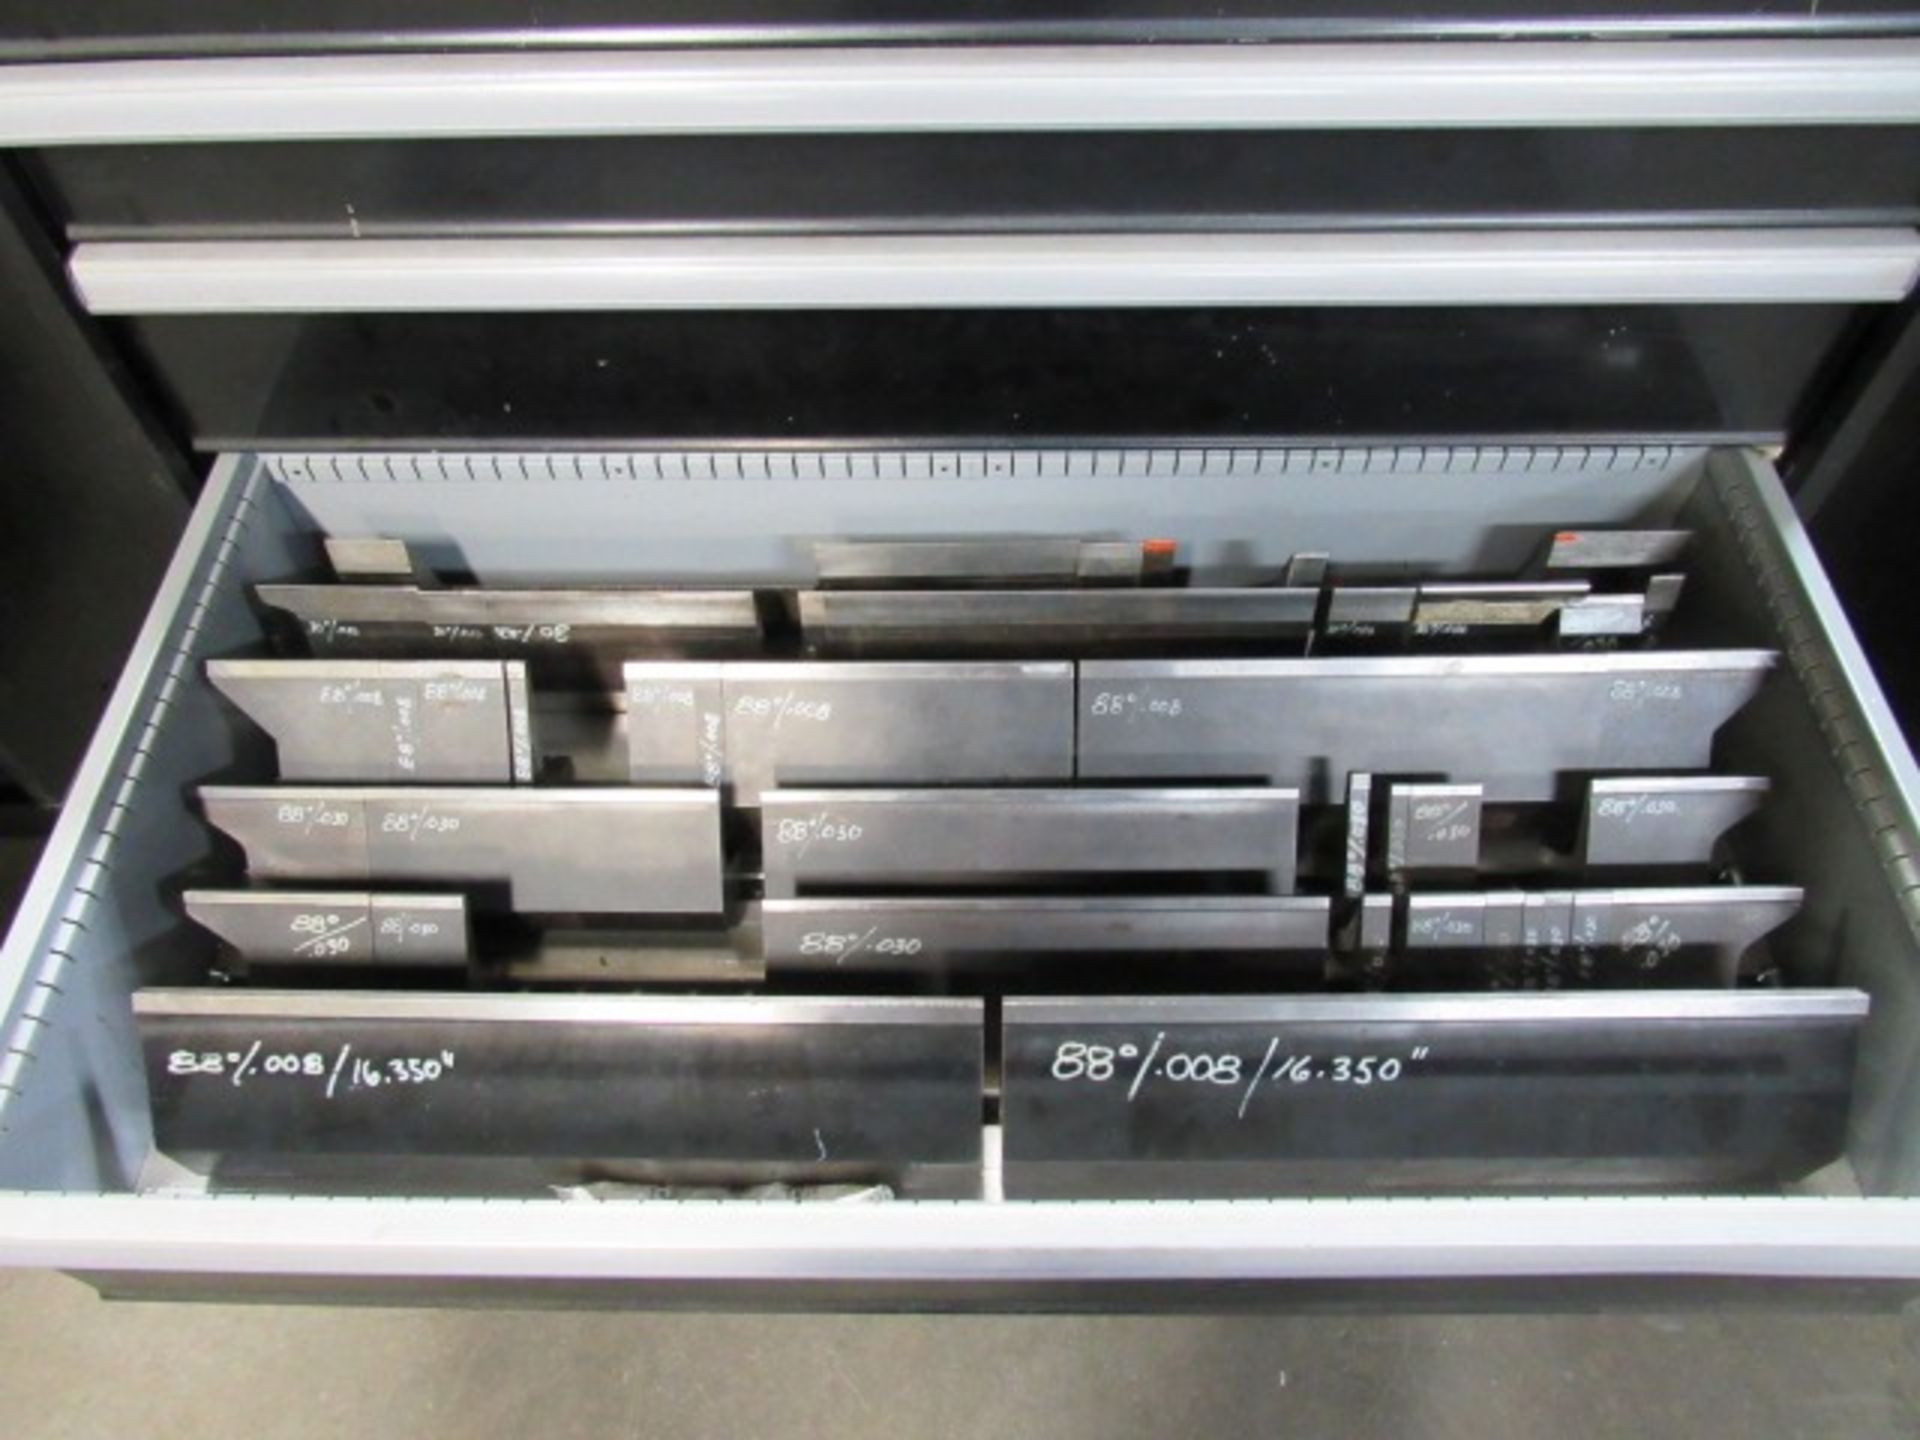 Lista 5 Drawer Cabinet with Press Brake Dies - Image 4 of 7